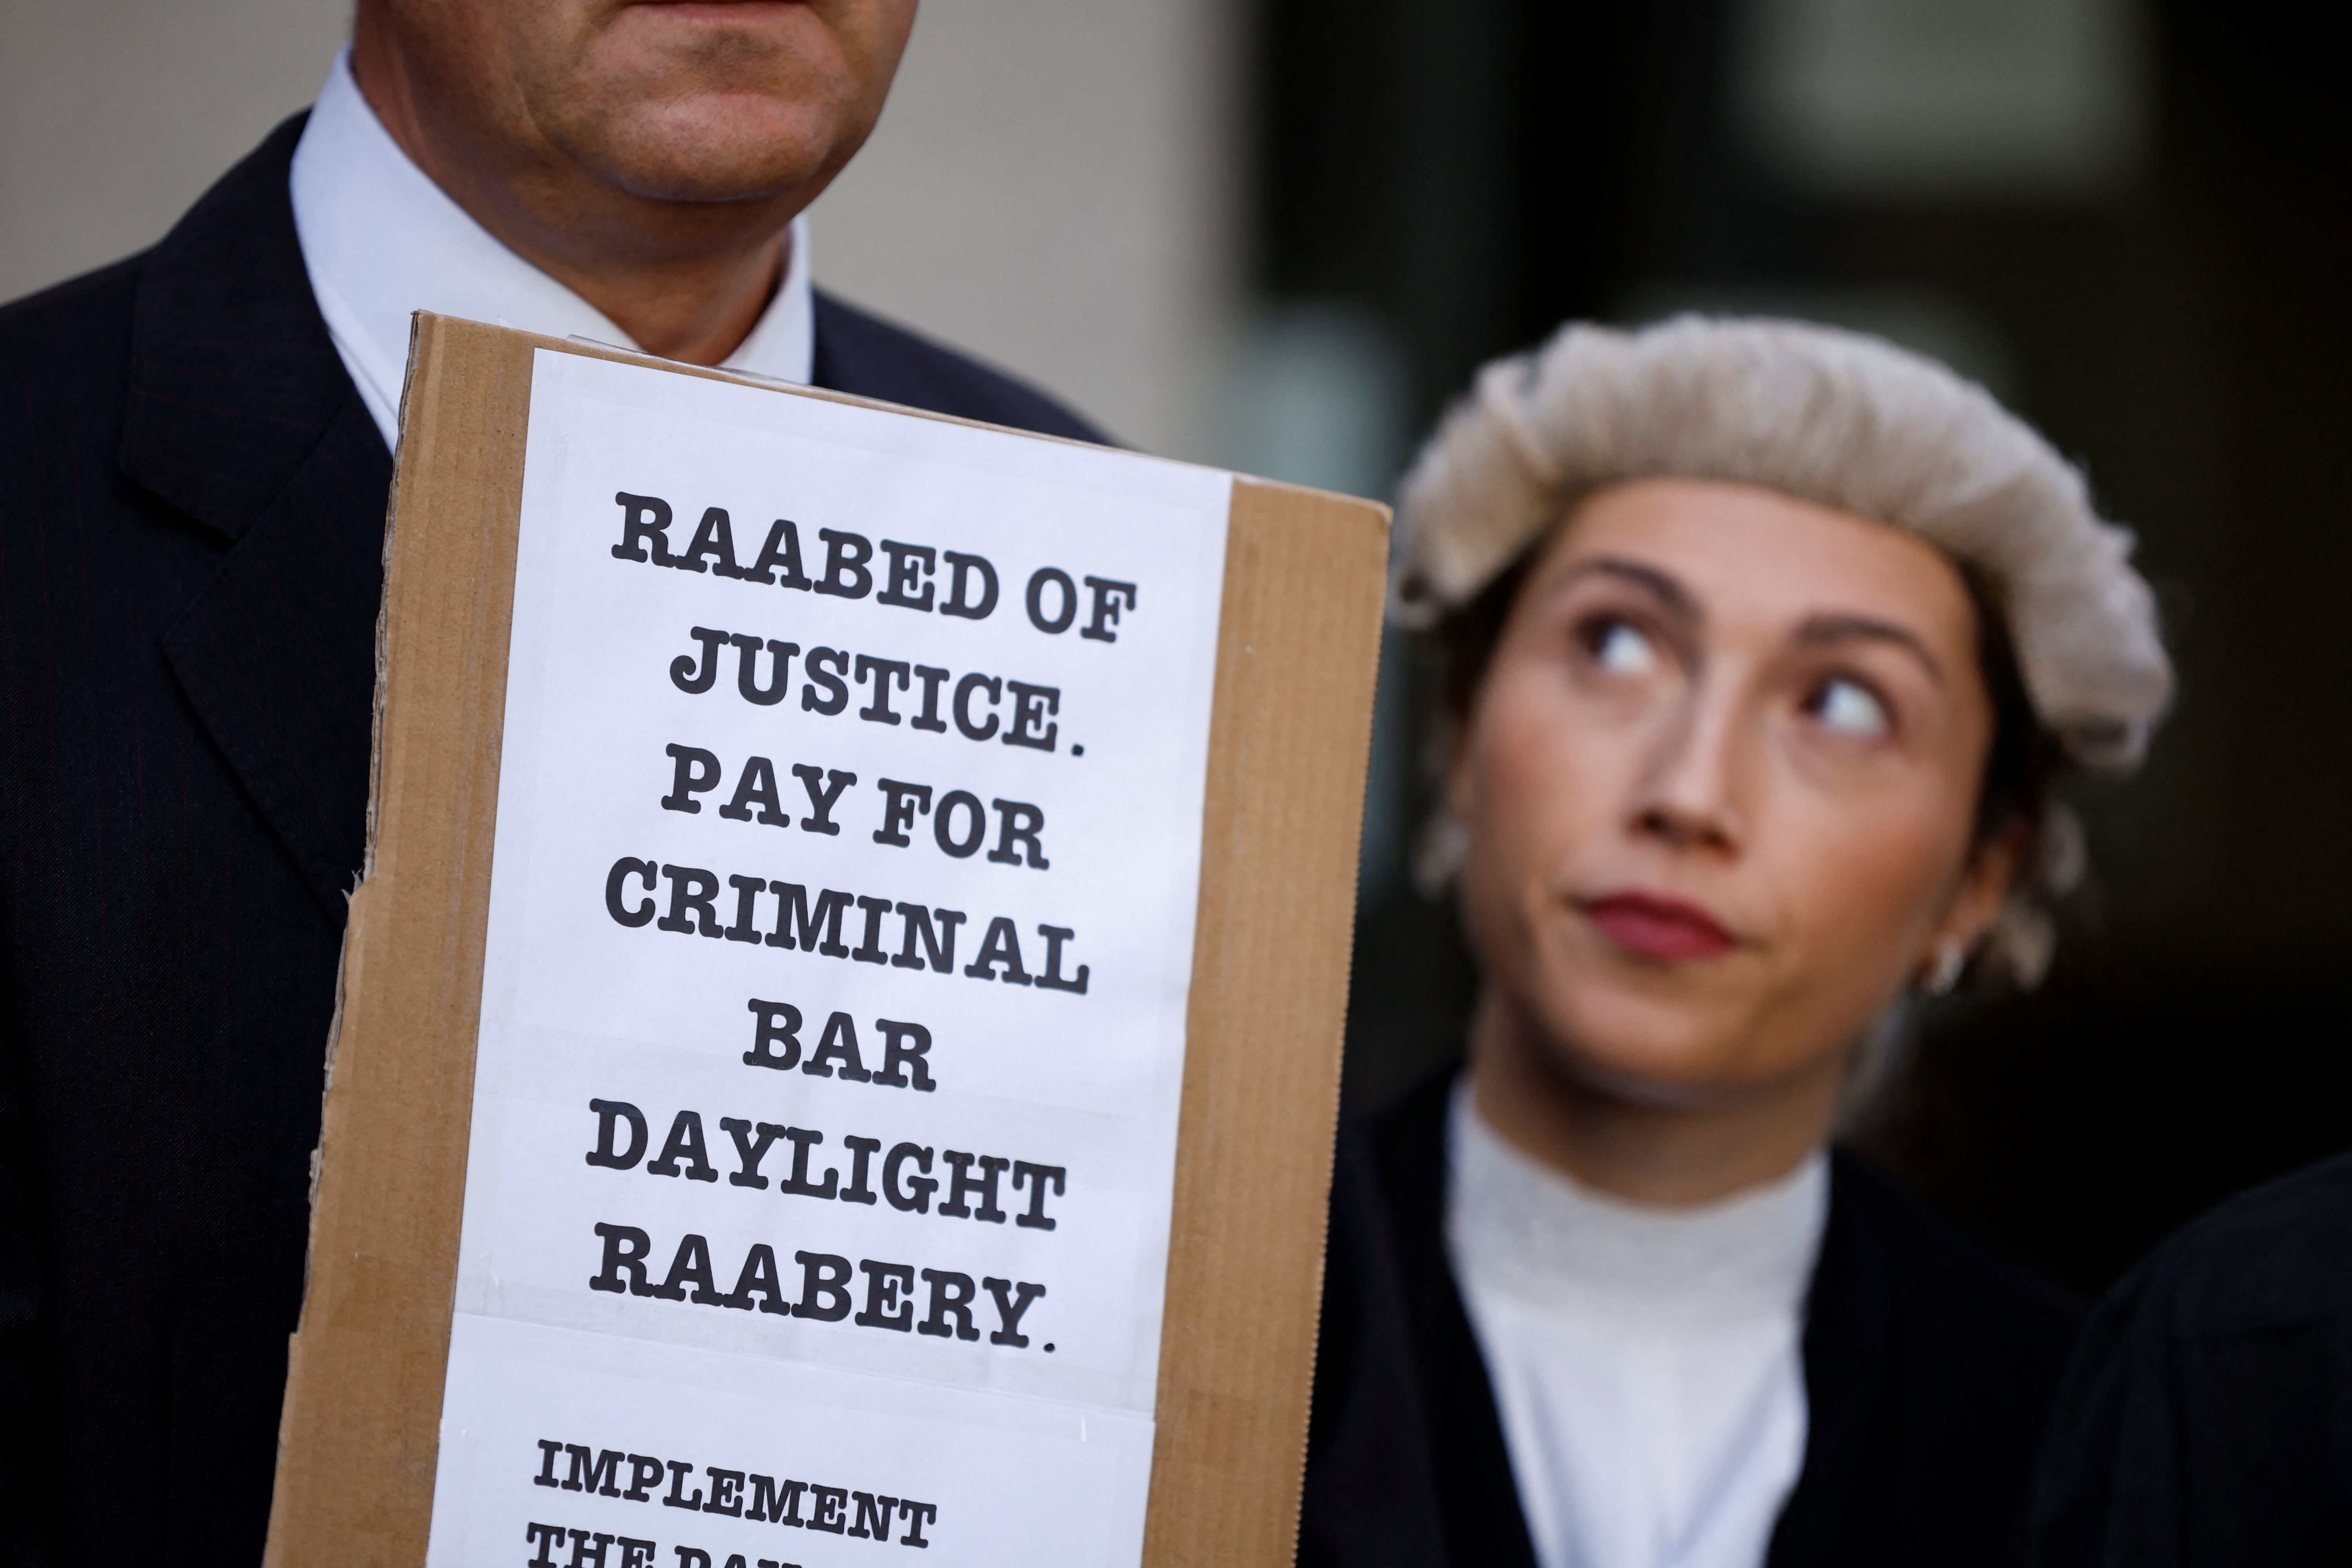 Criminal barristers protest in London